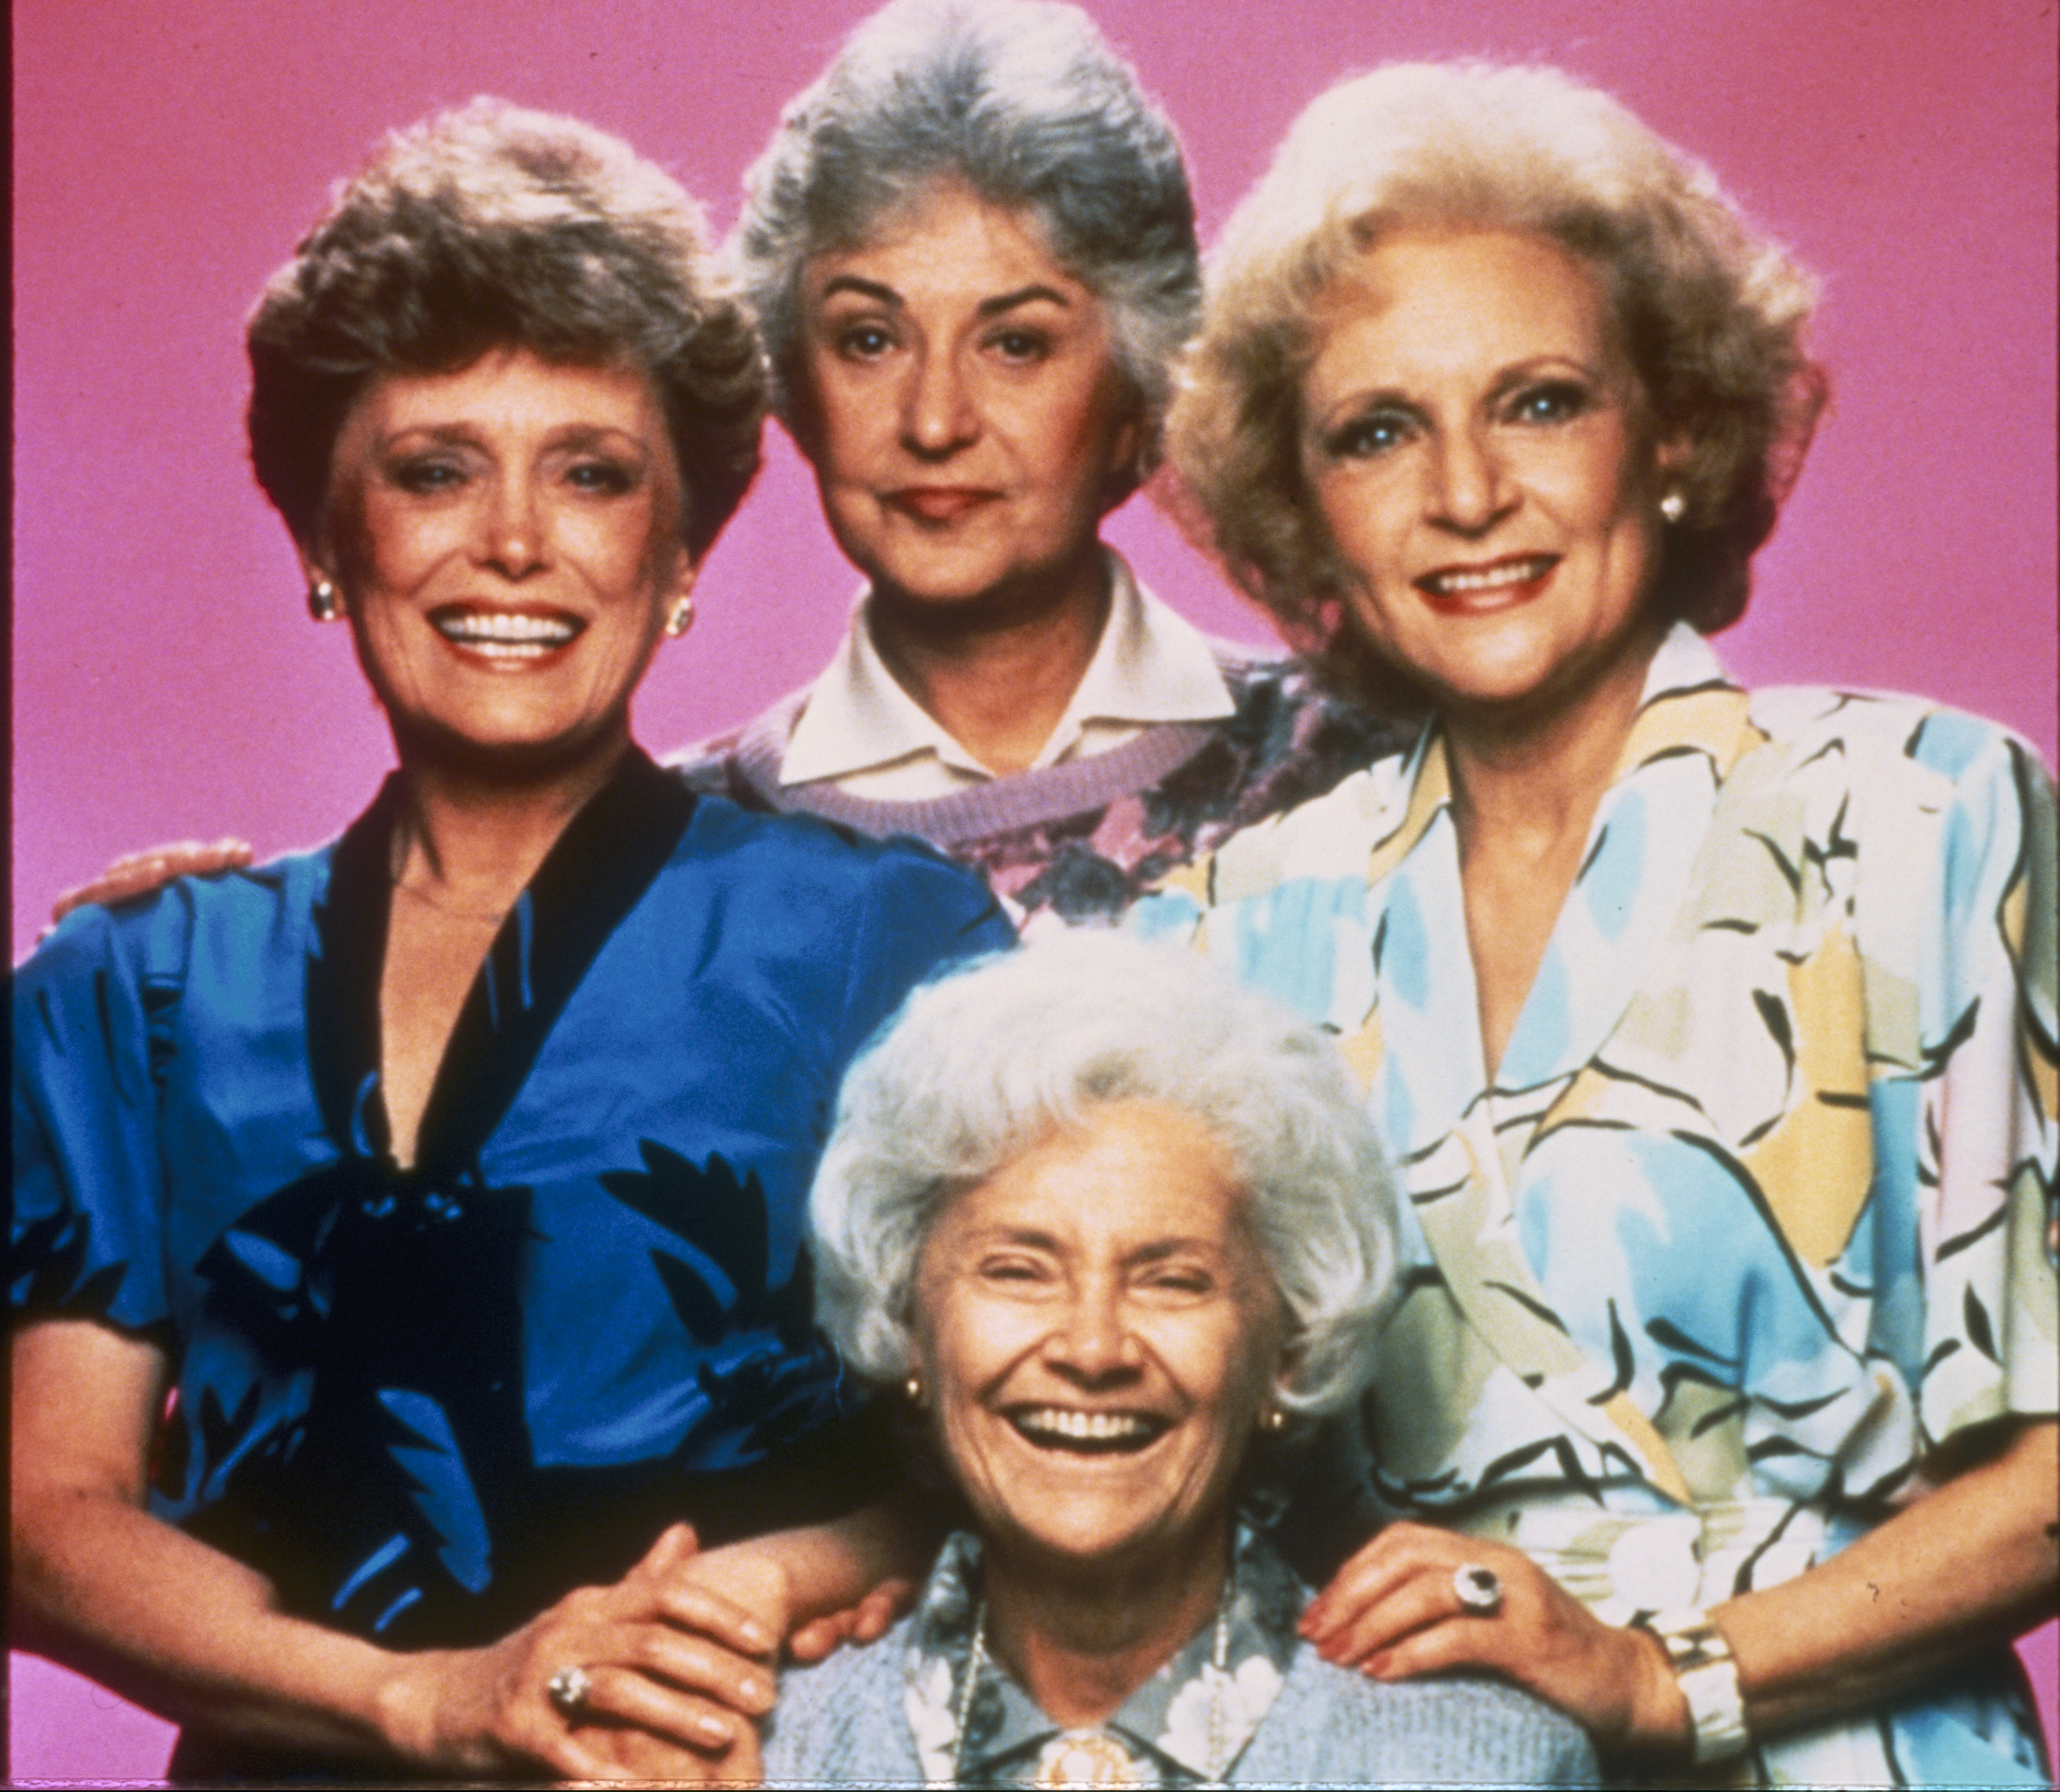 Bea Arthur, Betty White, Rue McClanahan and Estelle Getty in "Golden Girls." (ABC Photo Archives/Getty Images)